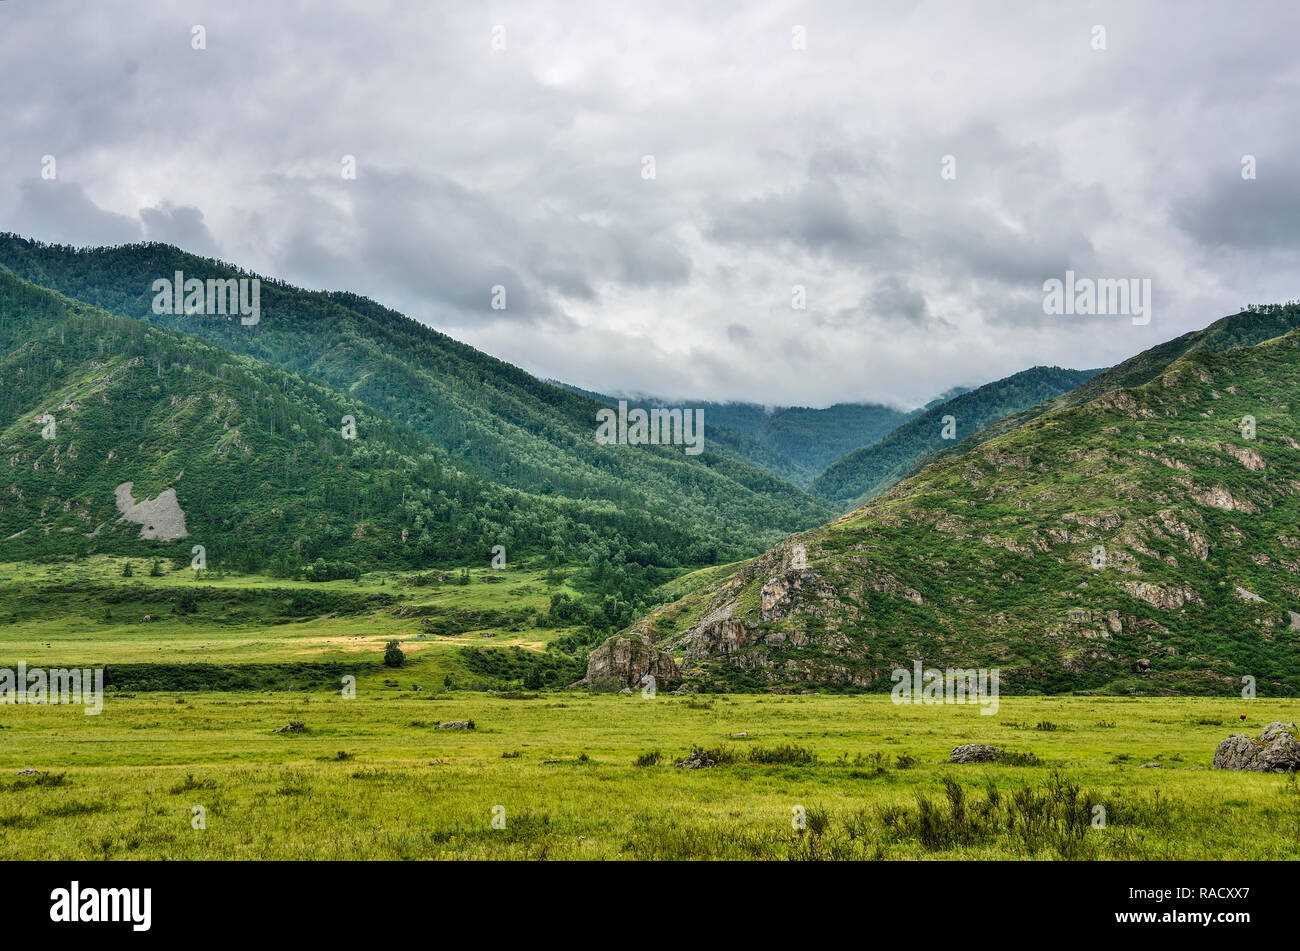 Picturesque gloomy cloudy summer landscape of mountain valley with green grass and bushes covered and with scattered boulders in the Altai Mountains,  Stock Photo